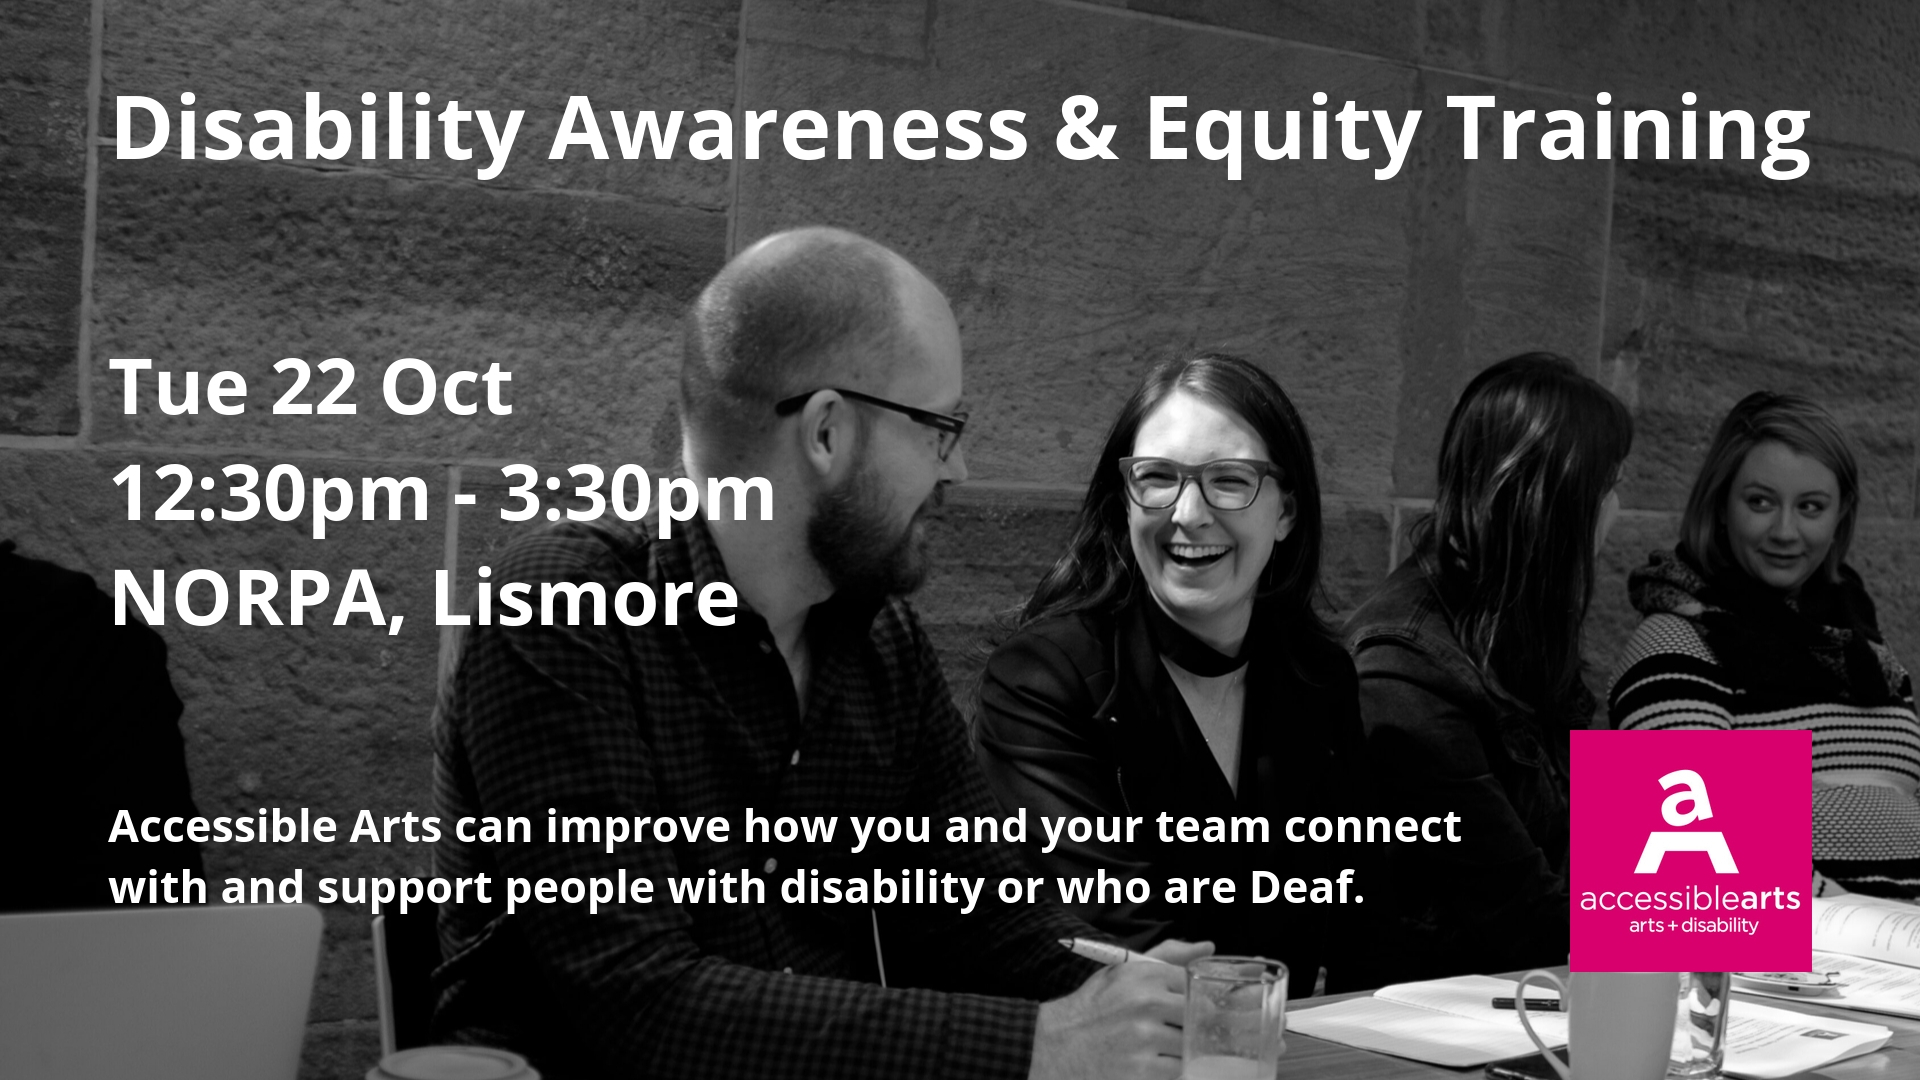 Image shows four people sitting at a long table, with one woman smiling and laughing. The words 'Disability Awareness & Equity Training' are across the top.